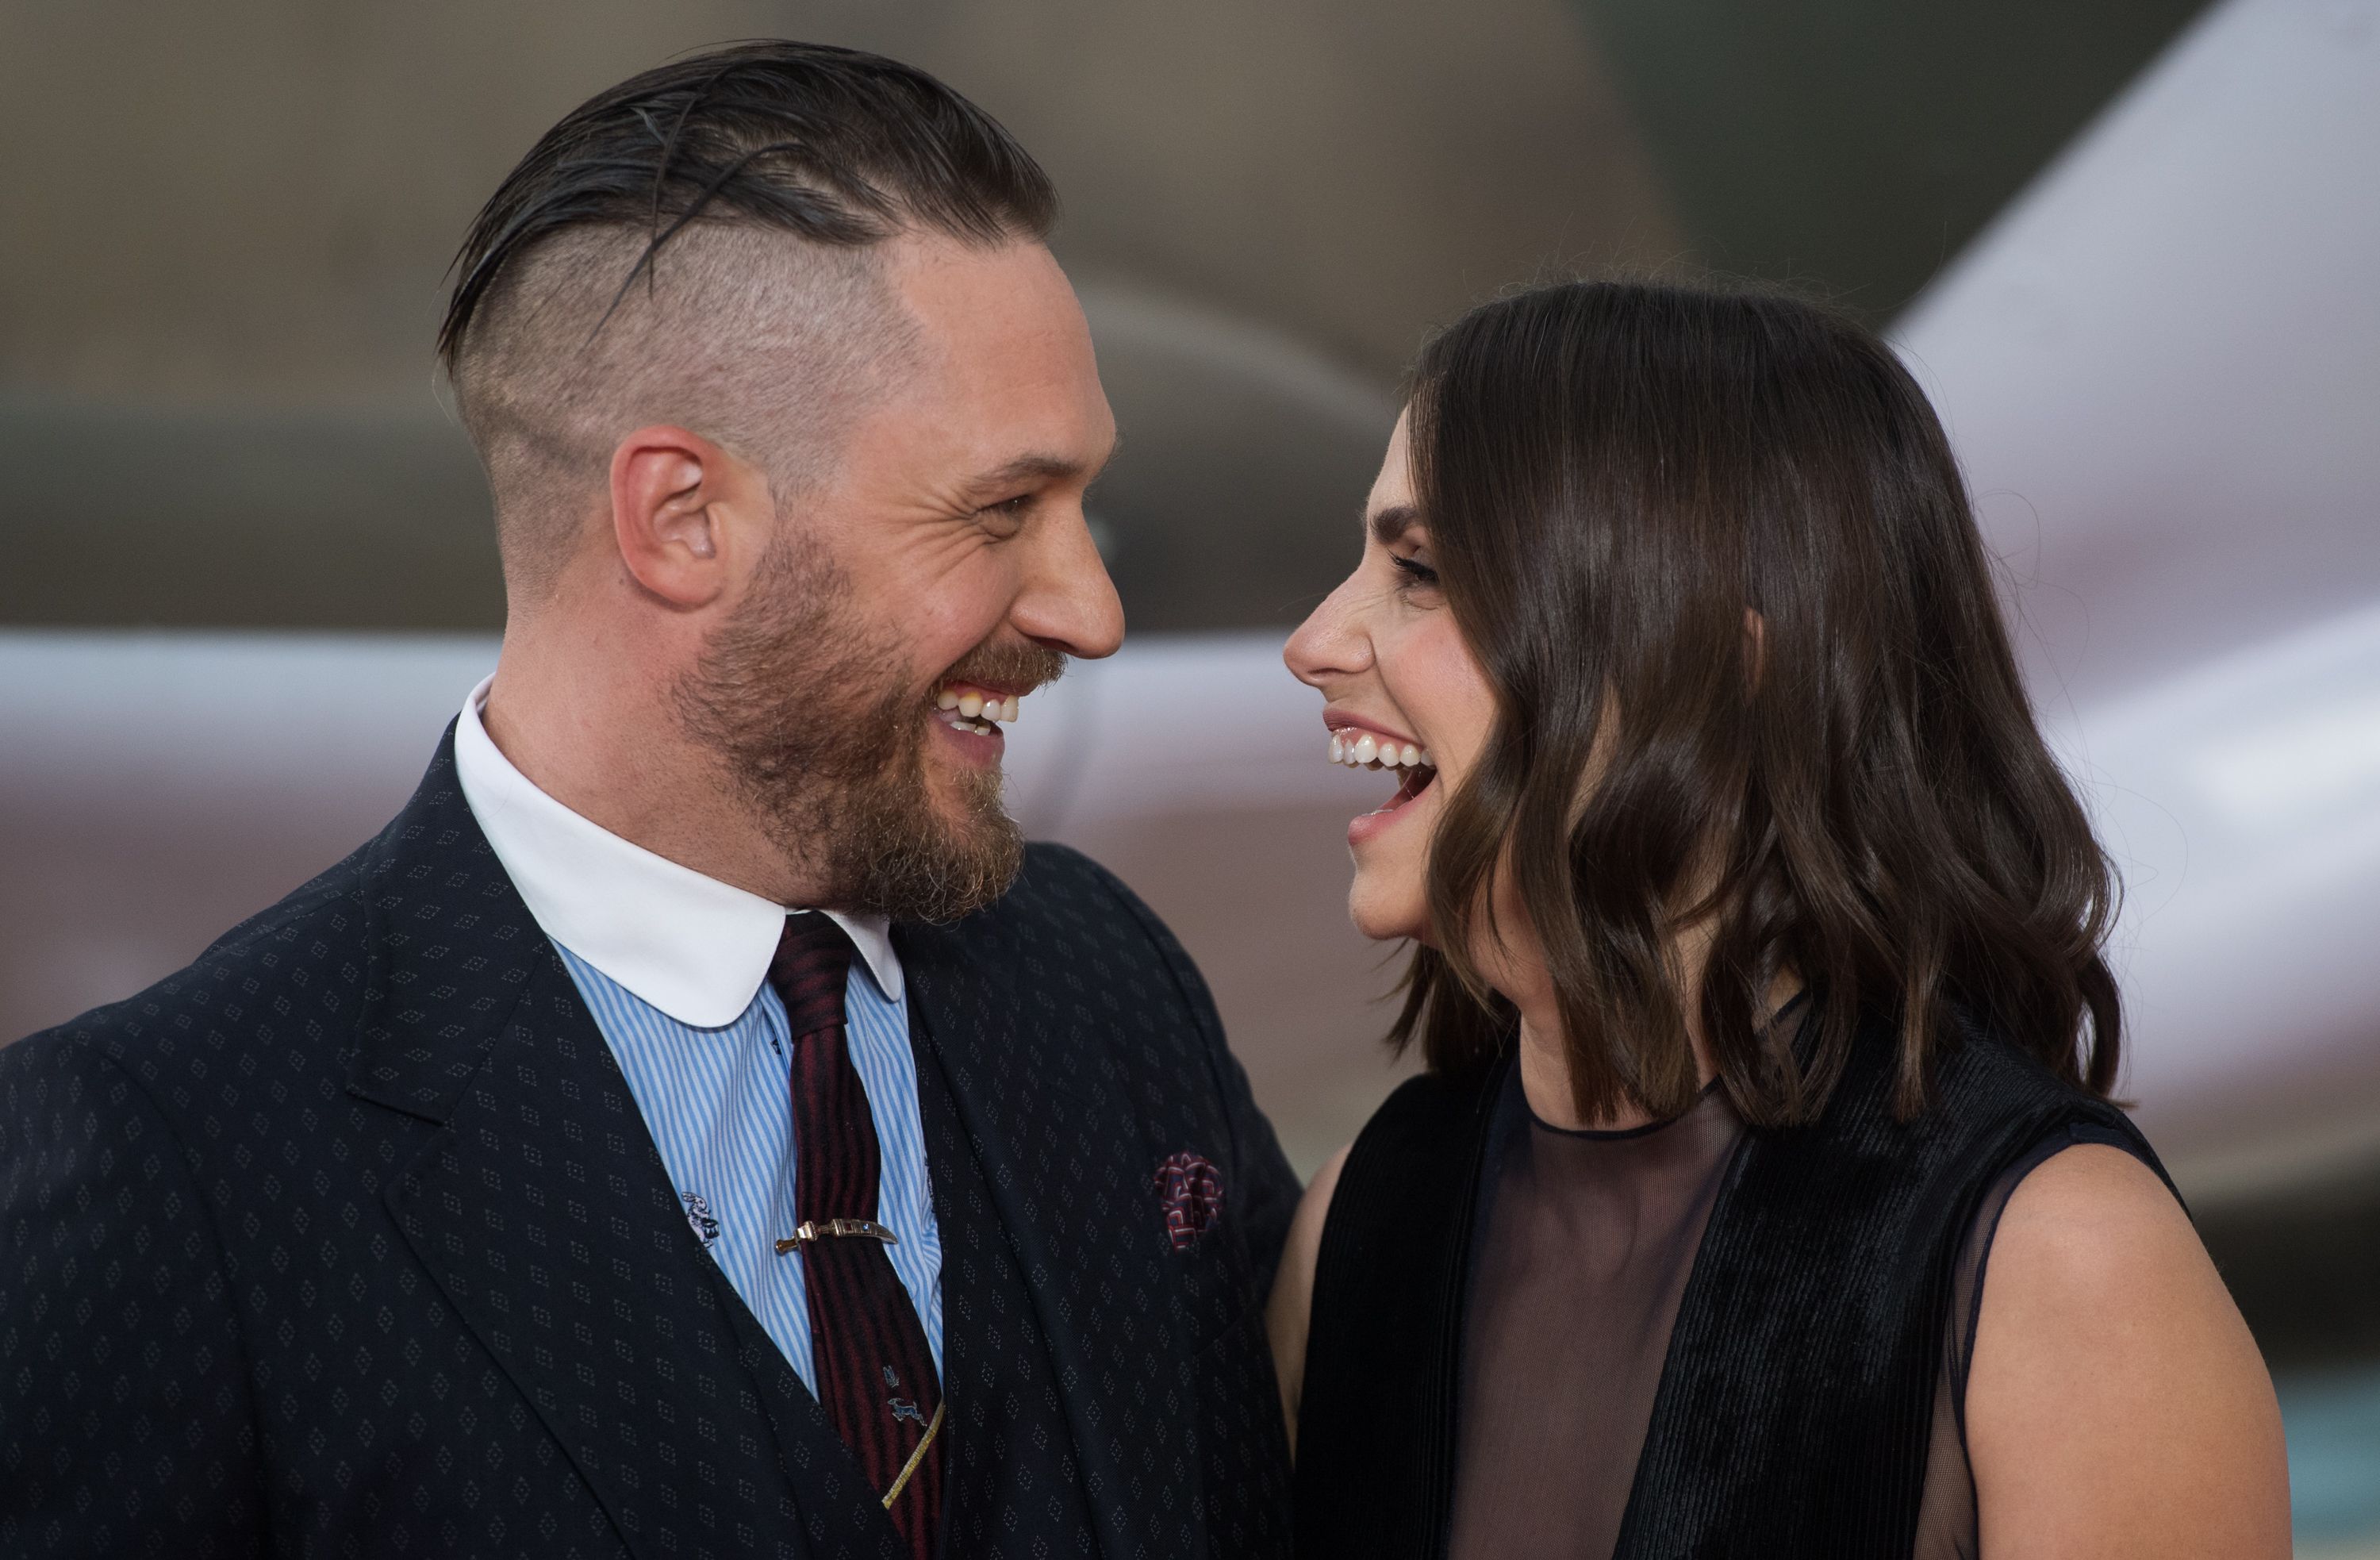 Tom Hardy and Charlotte Riley at the "Dunkirk" world premiere in 2017 in London, England | Source: Getty Images